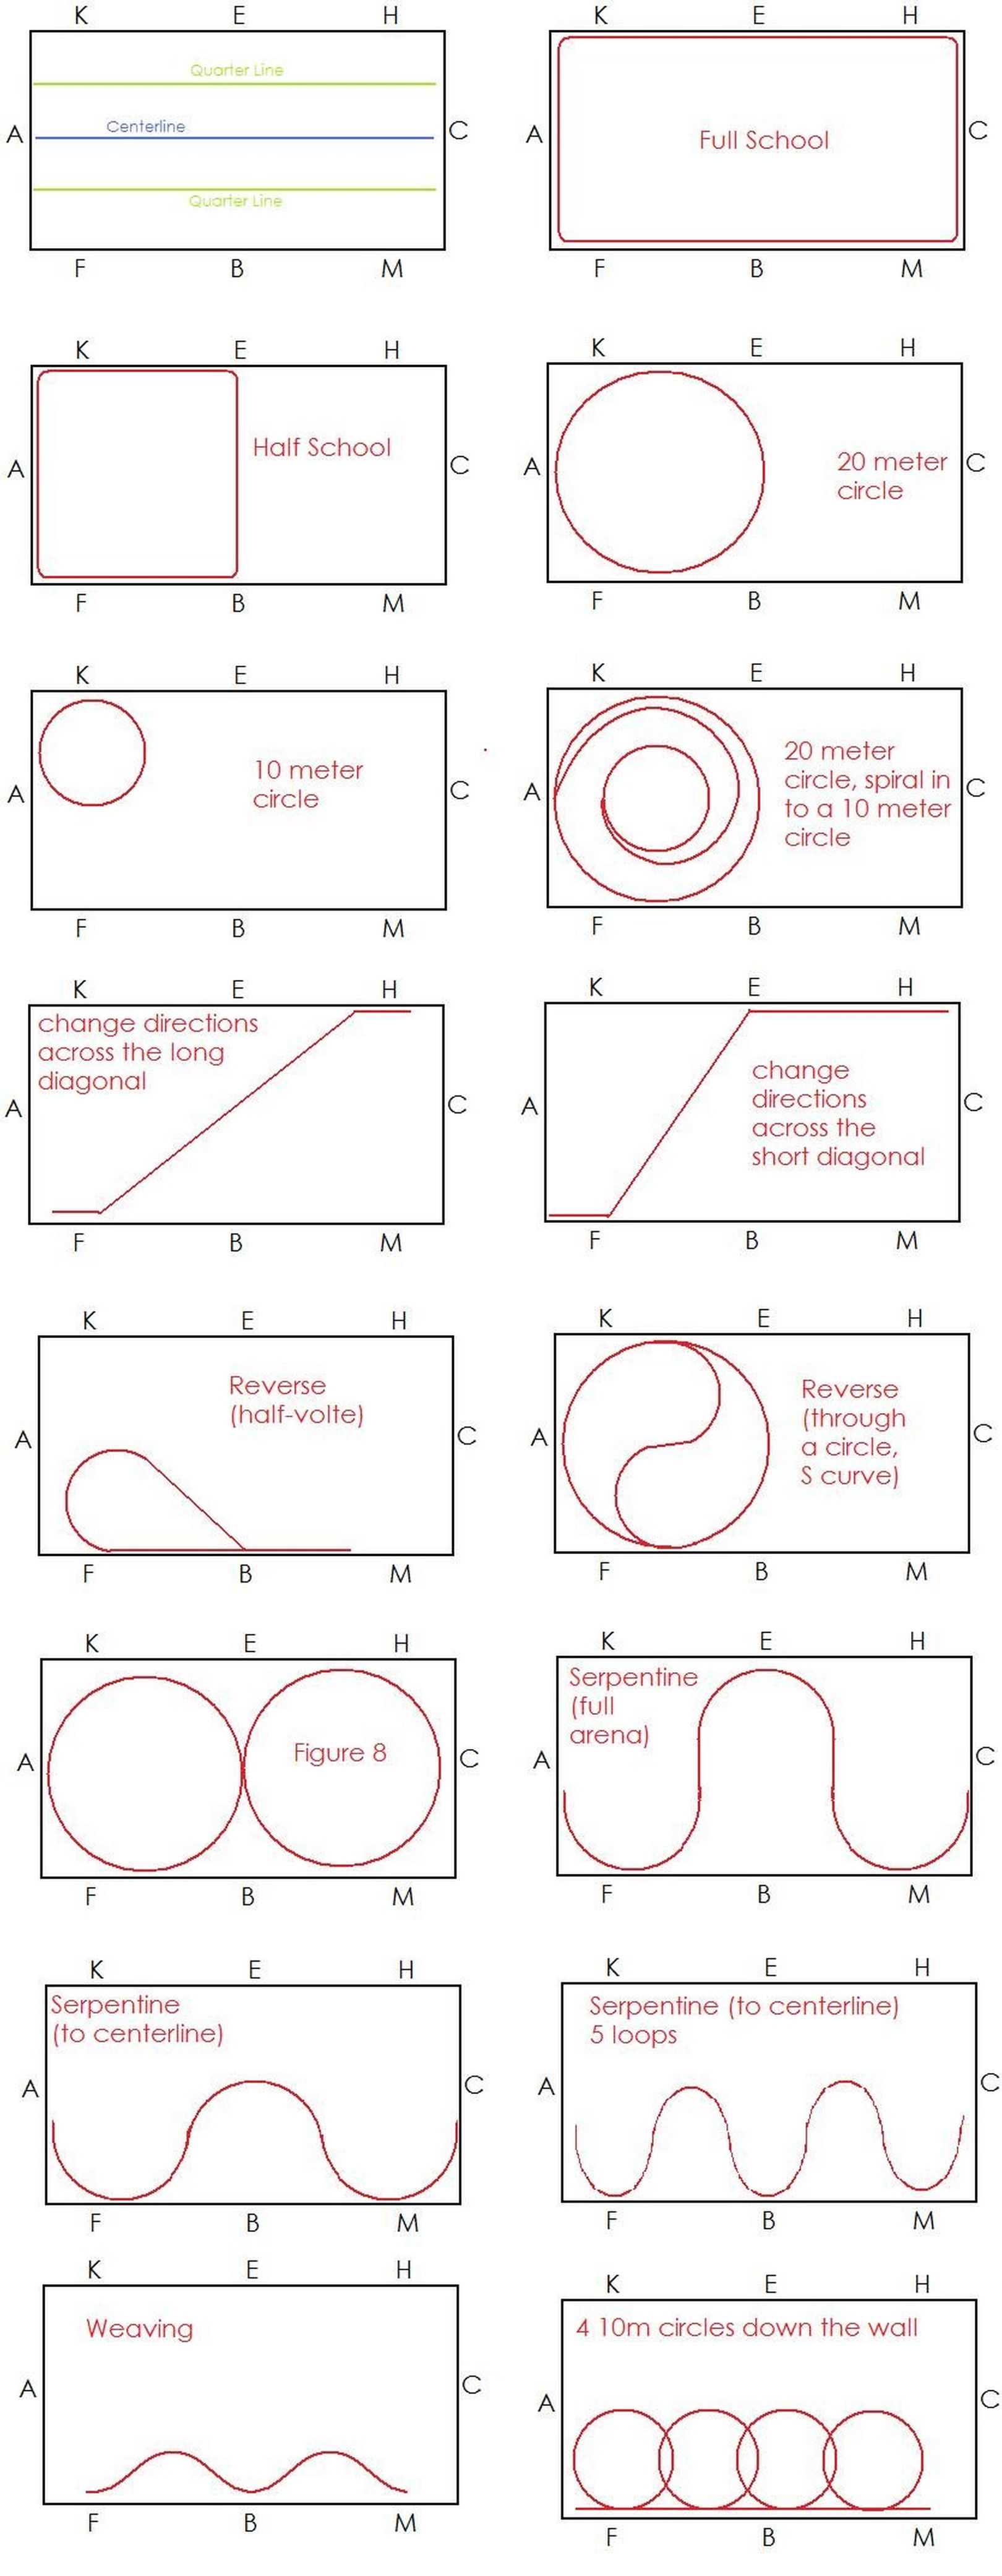 Schooling With Circles and Direction Changes